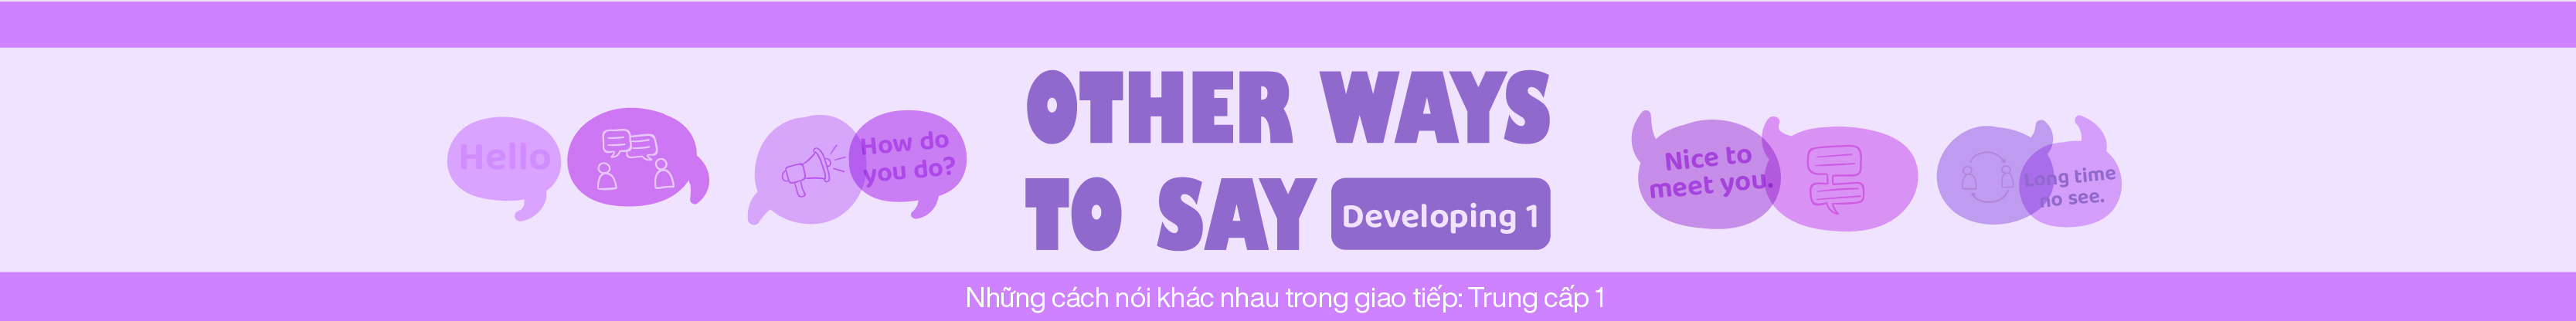 OTHER WAYS TO SAY: DEVELOPING 1 banner